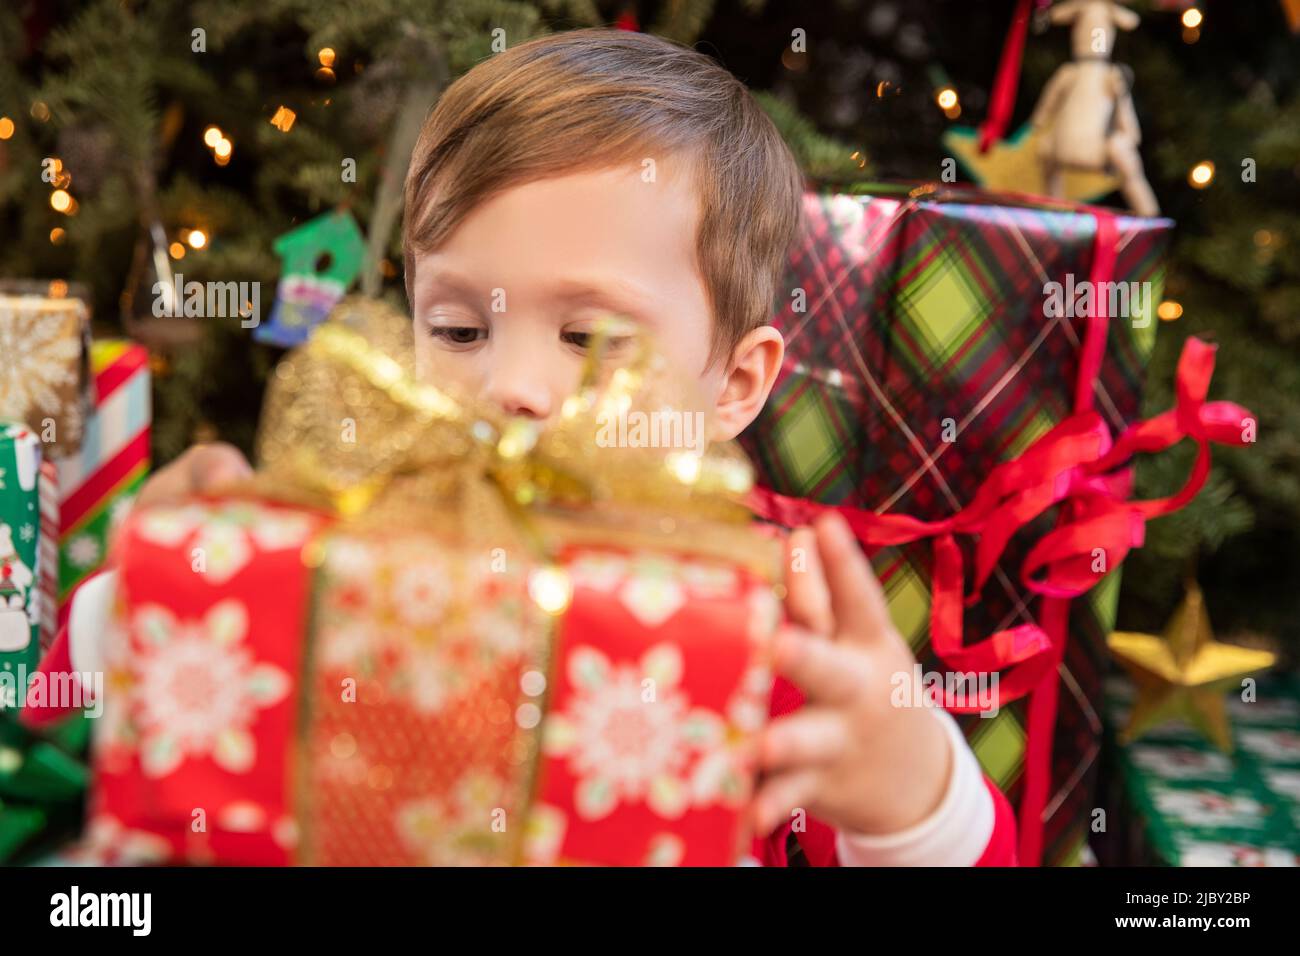 Excited boy opening gifts on Christmas Stock Photo